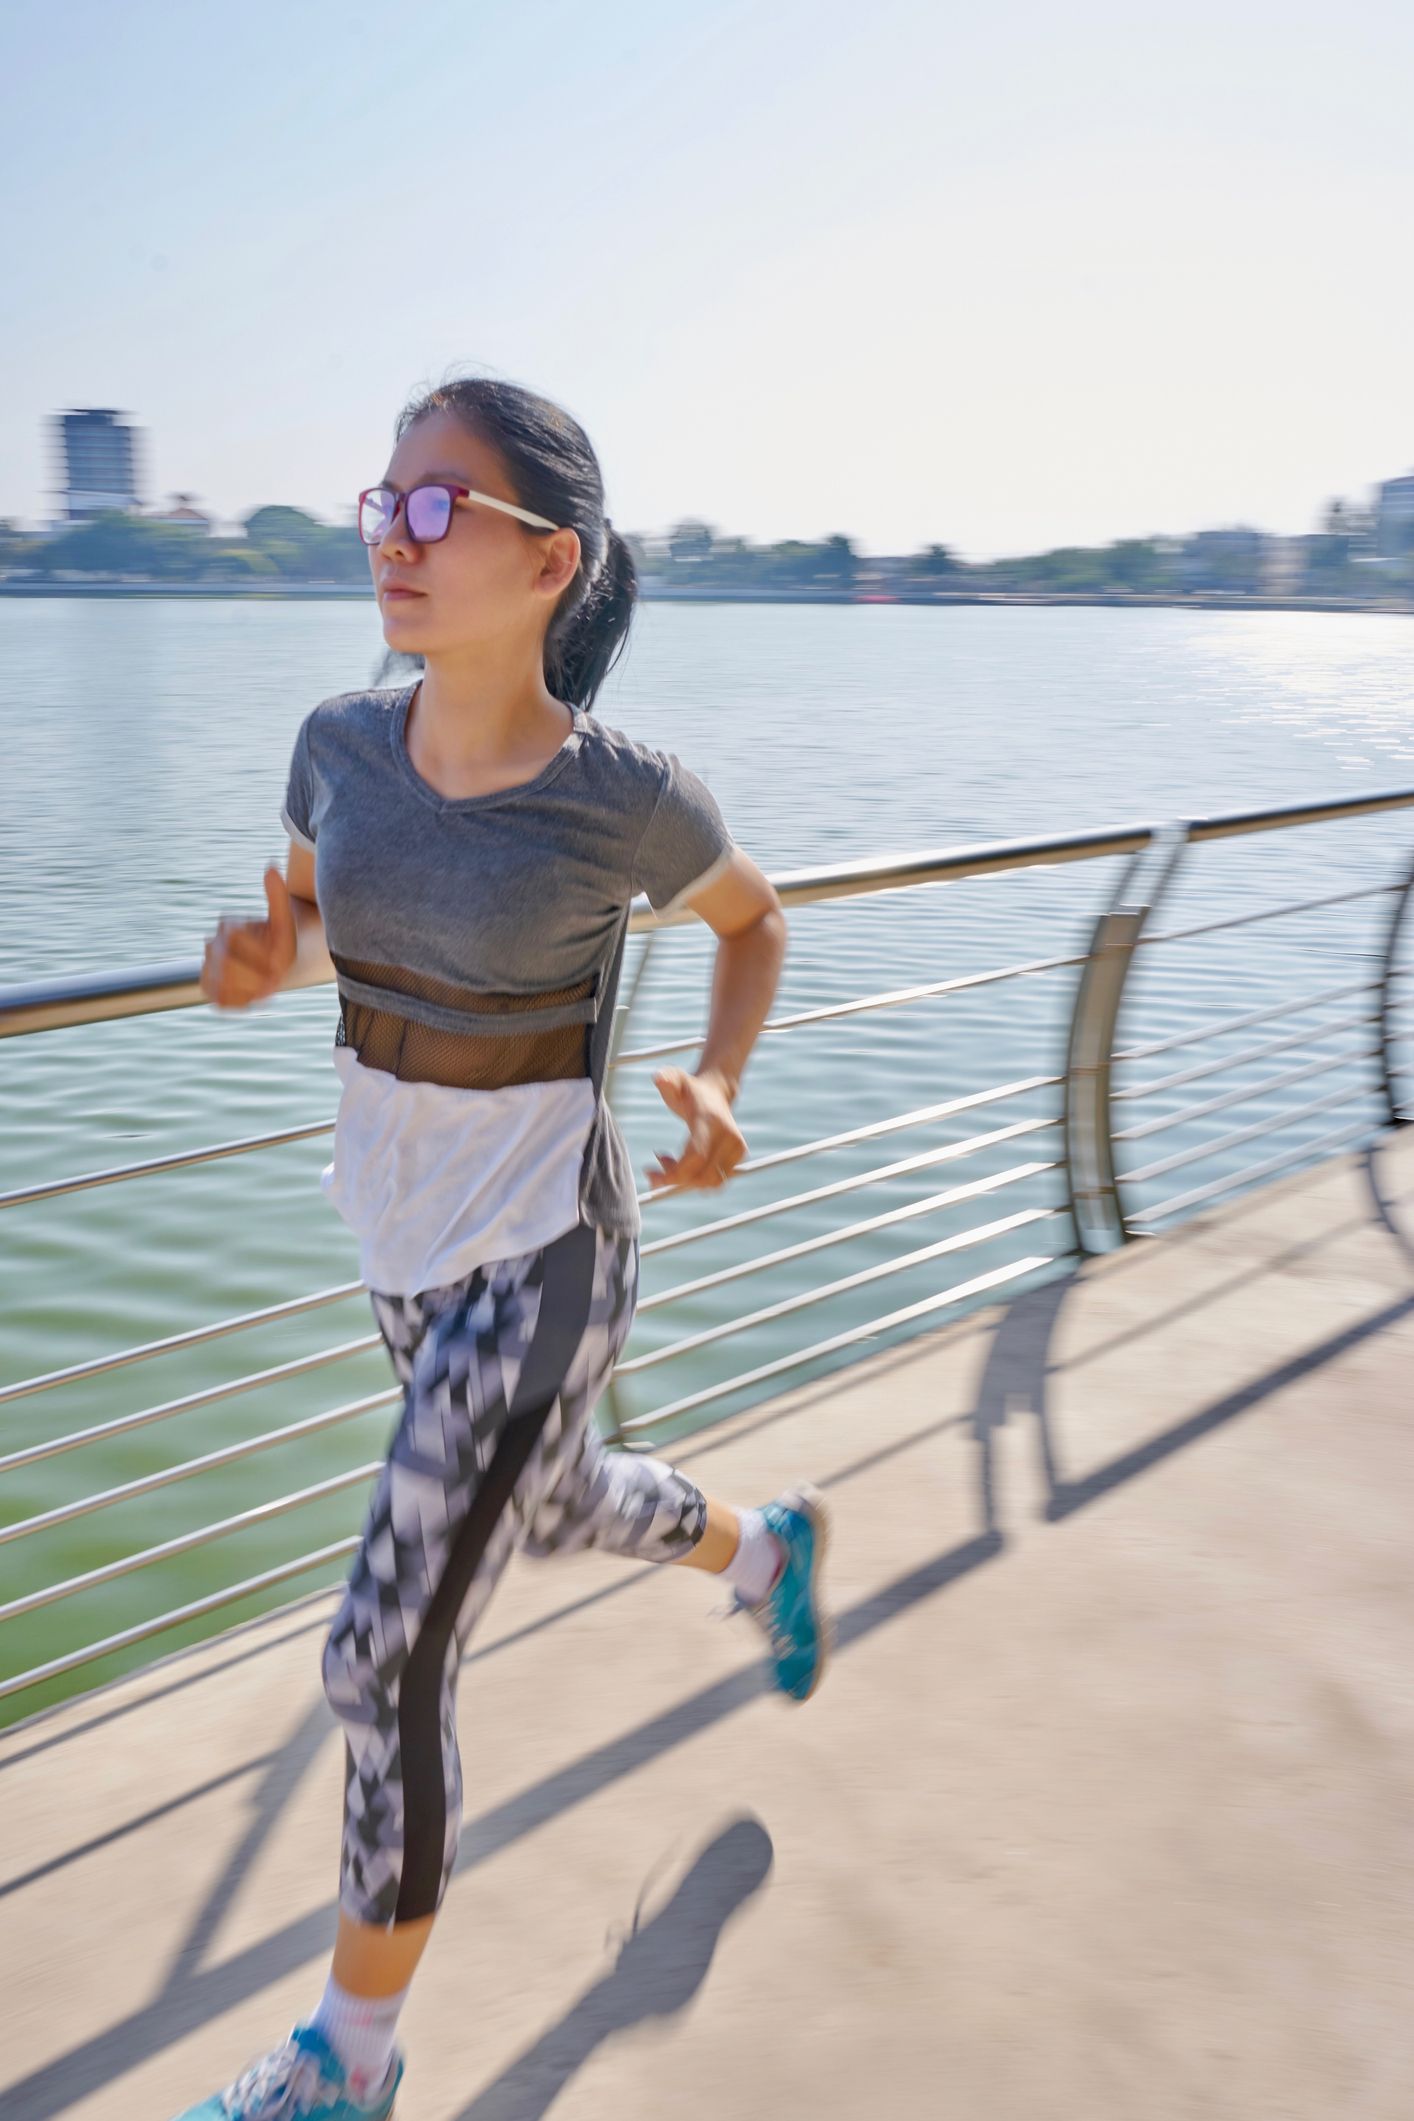 How to Run With Glasses Without Looking Like a Complete Noob